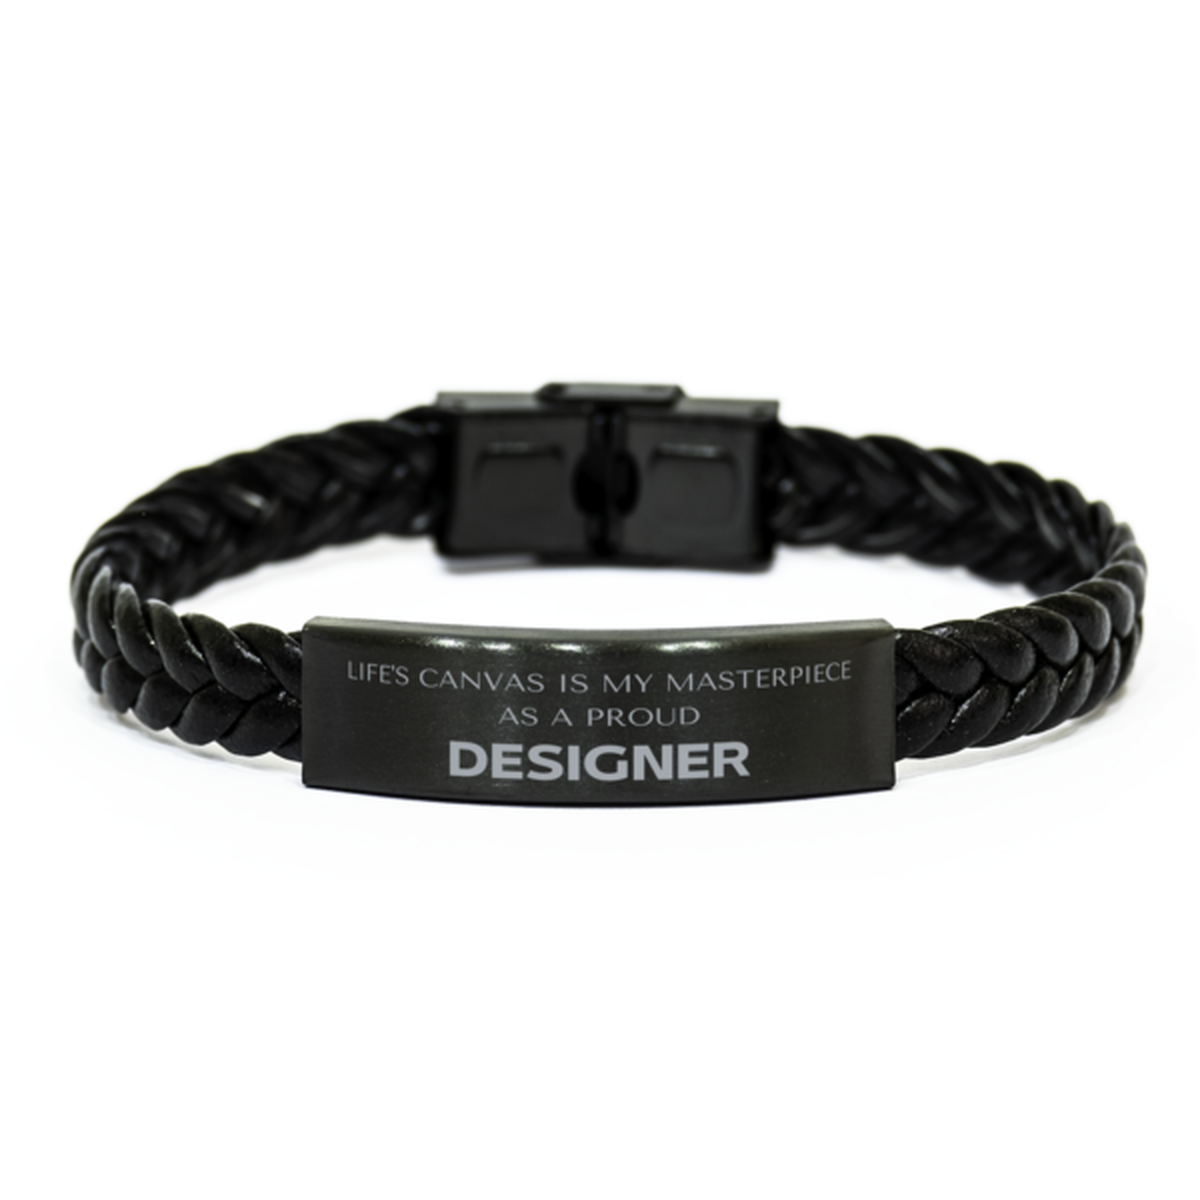 Proud Designer Gifts, Life's canvas is my masterpiece, Epic Birthday Christmas Unique Braided Leather Bracelet For Designer, Coworkers, Men, Women, Friends